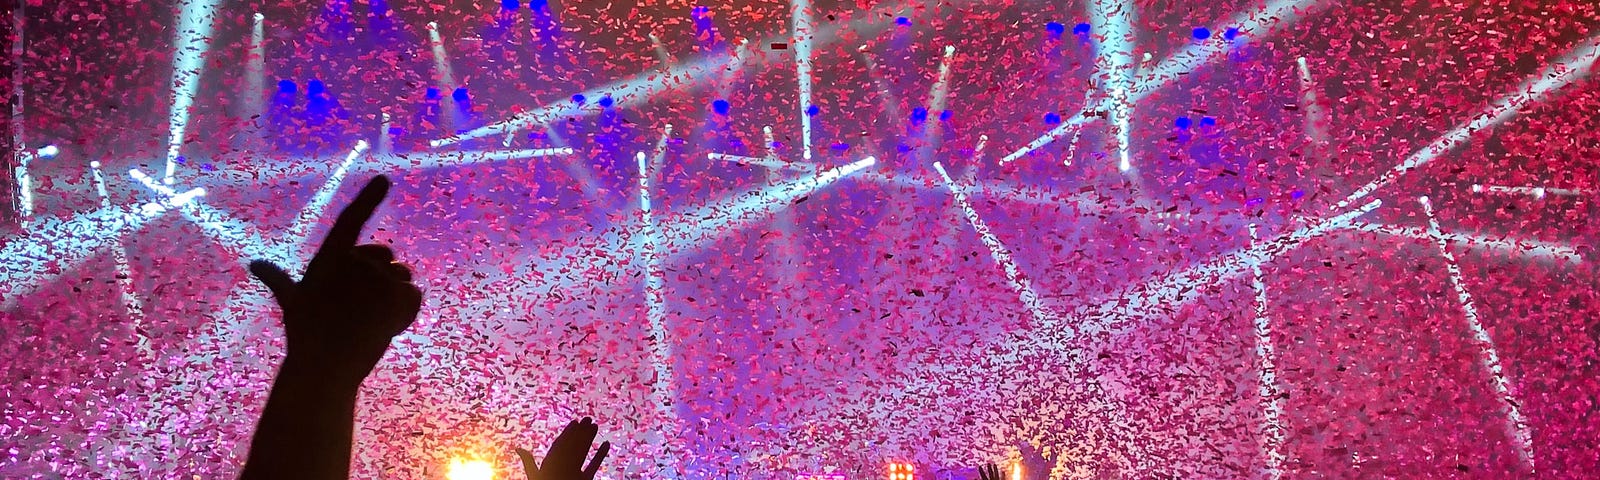 It’s a crazy concert with confetti in the air and pink and purple lights. People have their hands up in the air and they are having a great time!